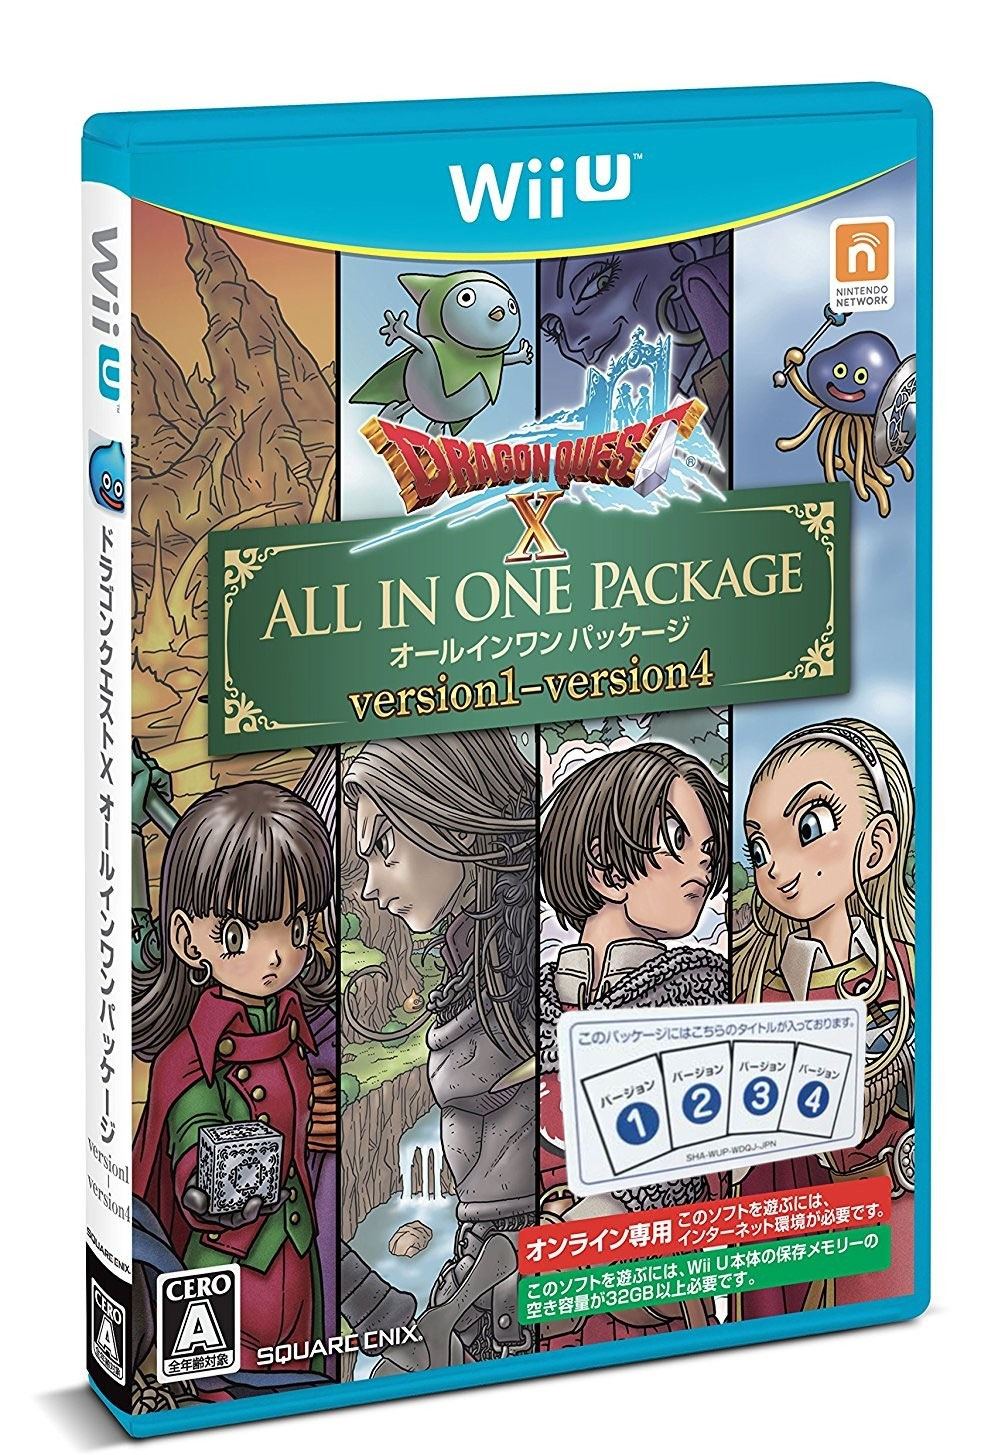 Dragon Quest X: All In One Package (Version 1 - 4) for Wii U 